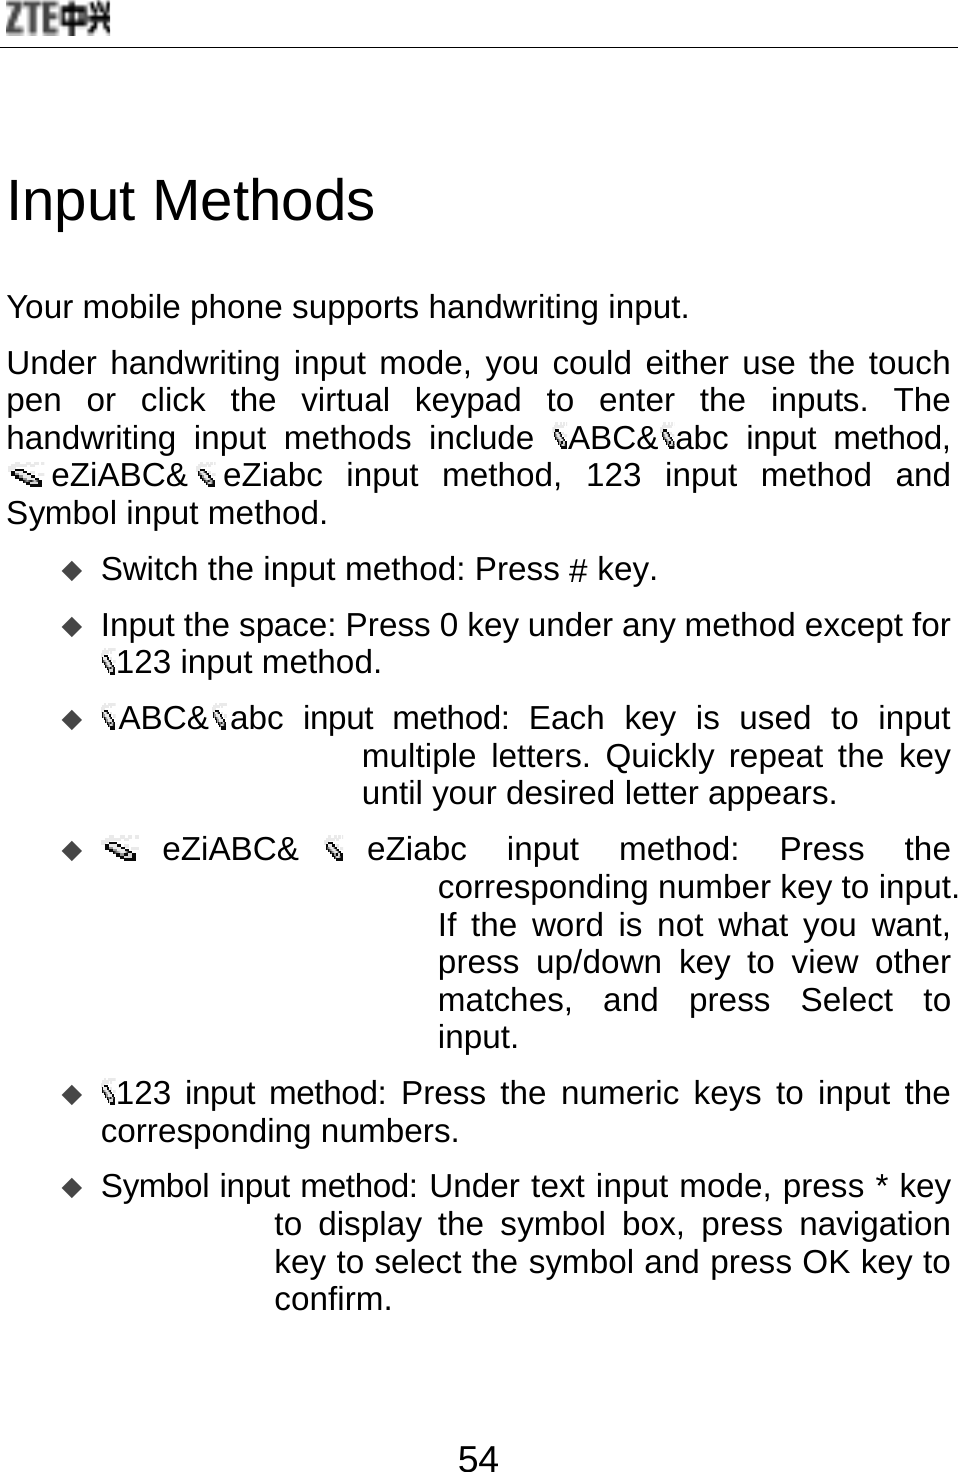  54 Input Methods Your mobile phone supports handwriting input.   Under handwriting input mode, you could either use the touch pen or click the virtual keypad to enter the inputs. The handwriting input methods include  ABC&amp; abc input method, eZiABC&amp; eZiabc input method, 123 input method and Symbol input method.  Switch the input method: Press # key.  Input the space: Press 0 key under any method except for 123 input method.    ABC&amp; abc input method: Each key is used to input multiple letters. Quickly repeat the key until your desired letter appears.    eZiABC&amp; eZiabc input method: Press the corresponding number key to input. If the word is not what you want, press up/down key to view other matches, and press Select to input.  123 input method: Press the numeric keys to input the corresponding numbers.    Symbol input method: Under text input mode, press * key to display the symbol box, press navigation key to select the symbol and press OK key to confirm. 